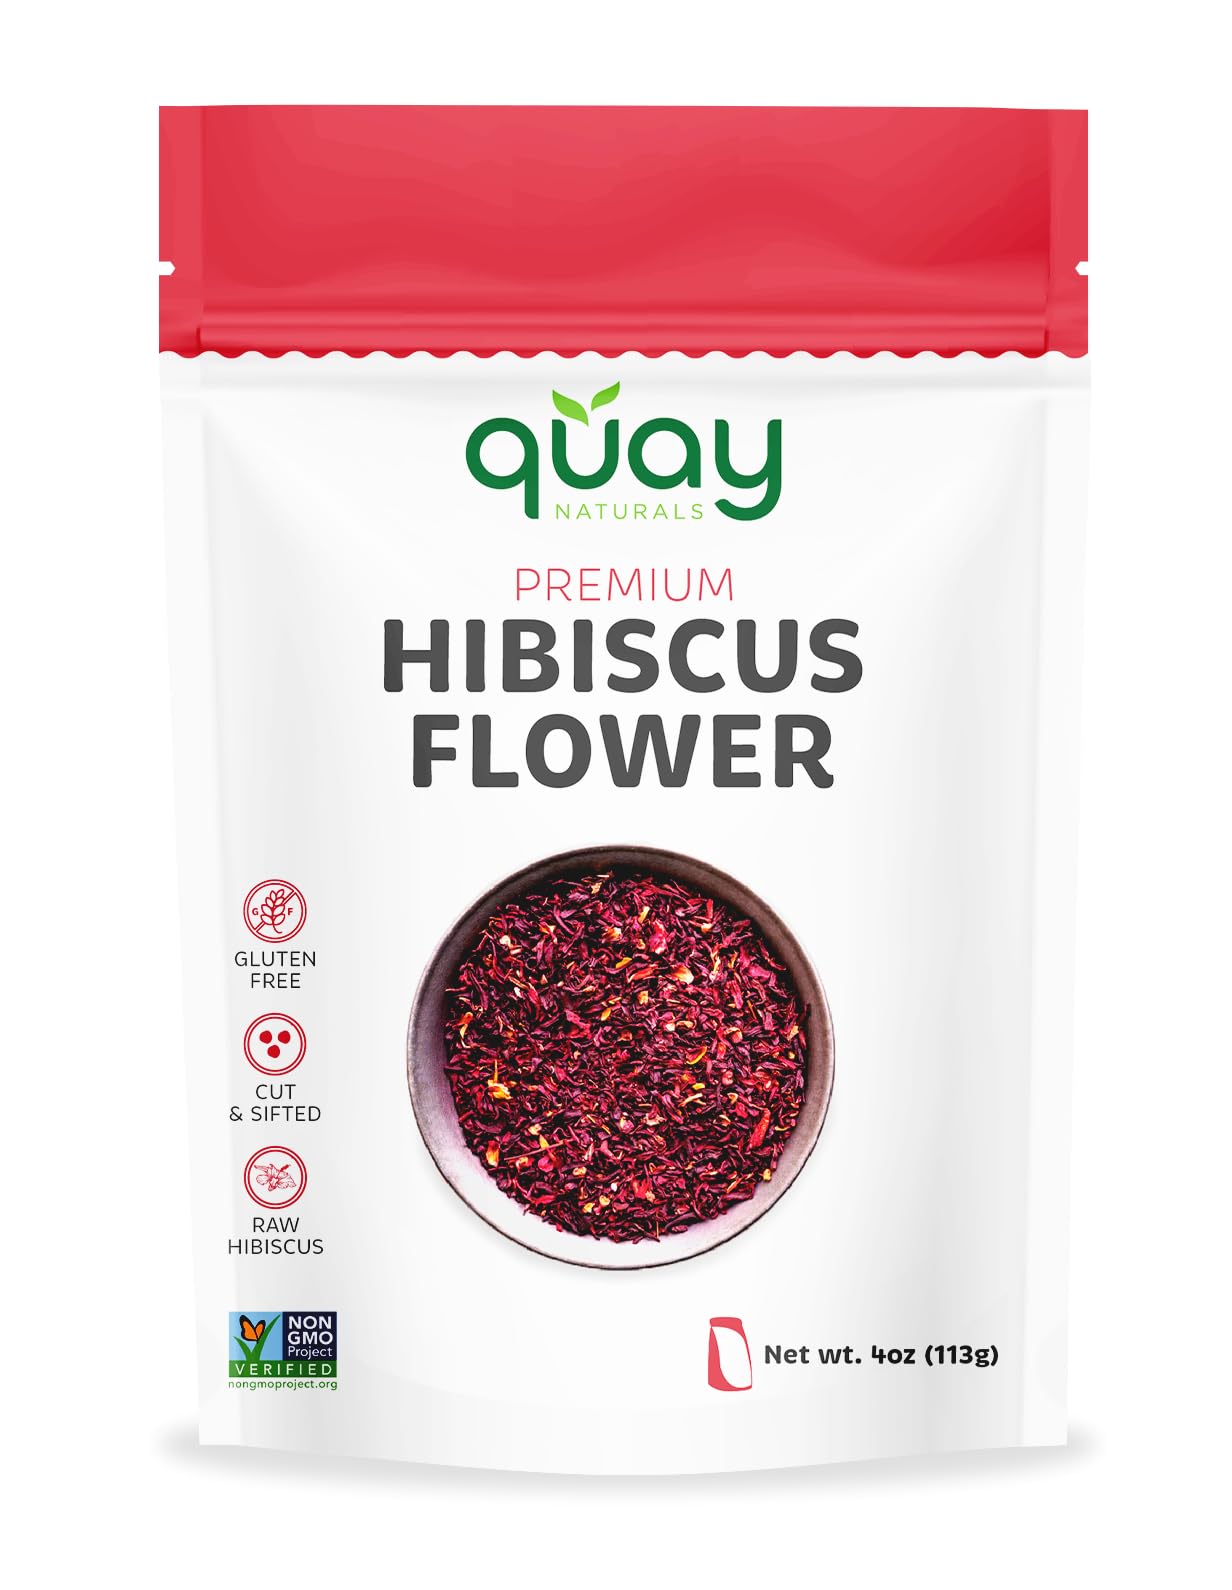 Quay Naturals Hibiscus Flowers, 4 oz, Flor de Jamaica - Cut & sifted - Pure & Natural Roselle Flowers for Teas, Smoothies & Baking - Hibiscus sabdariffa Flowers - Non GMO